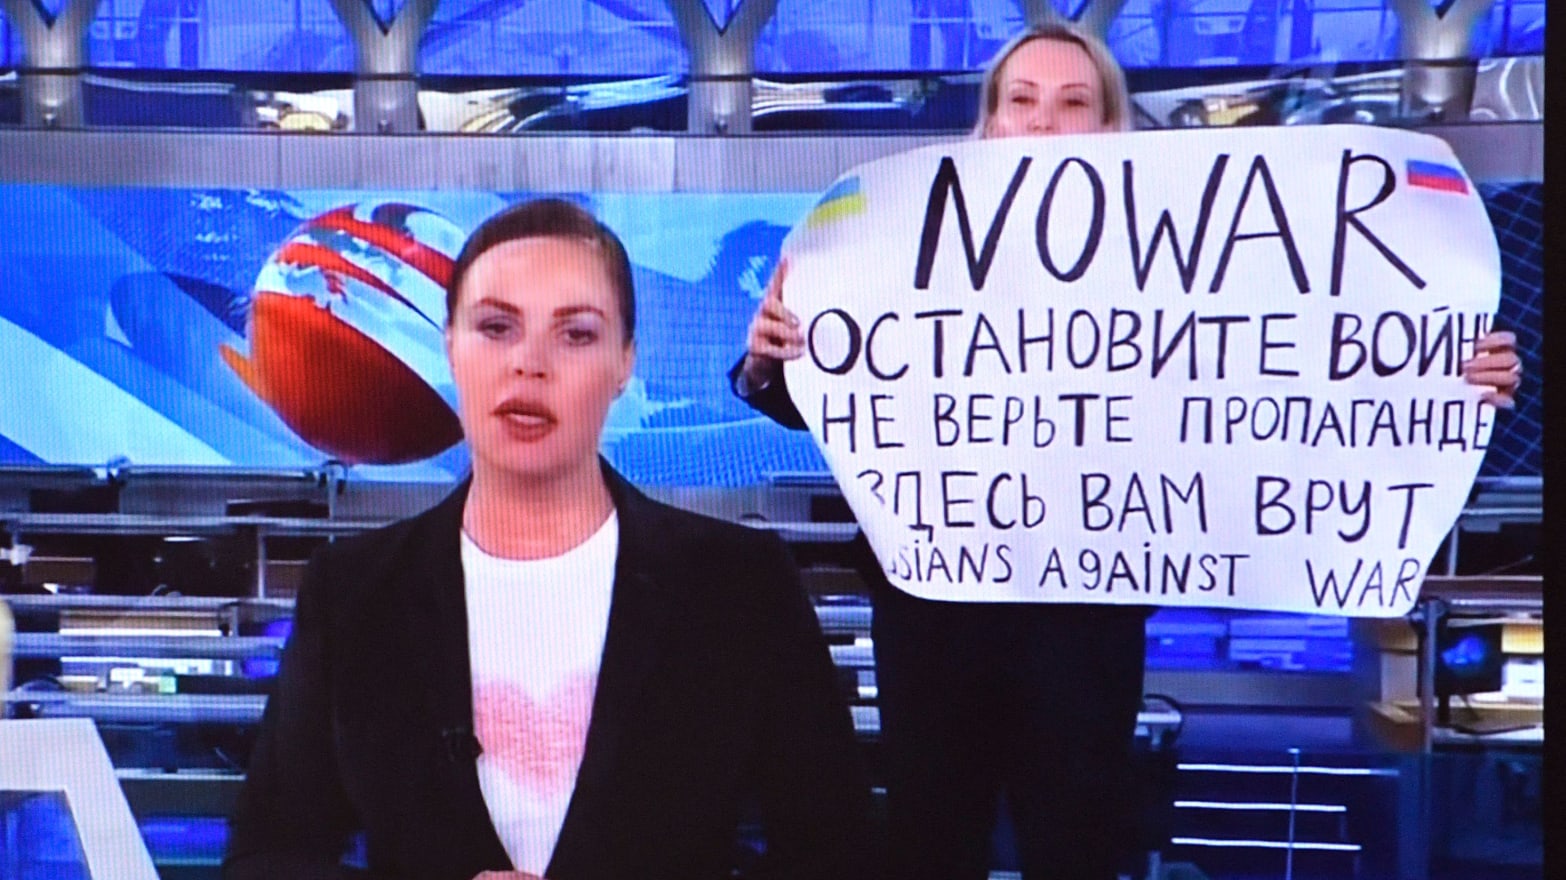 Marina Ovsyannikova held up a pro-Ukraine sign during a broadcast on Russian state TV.